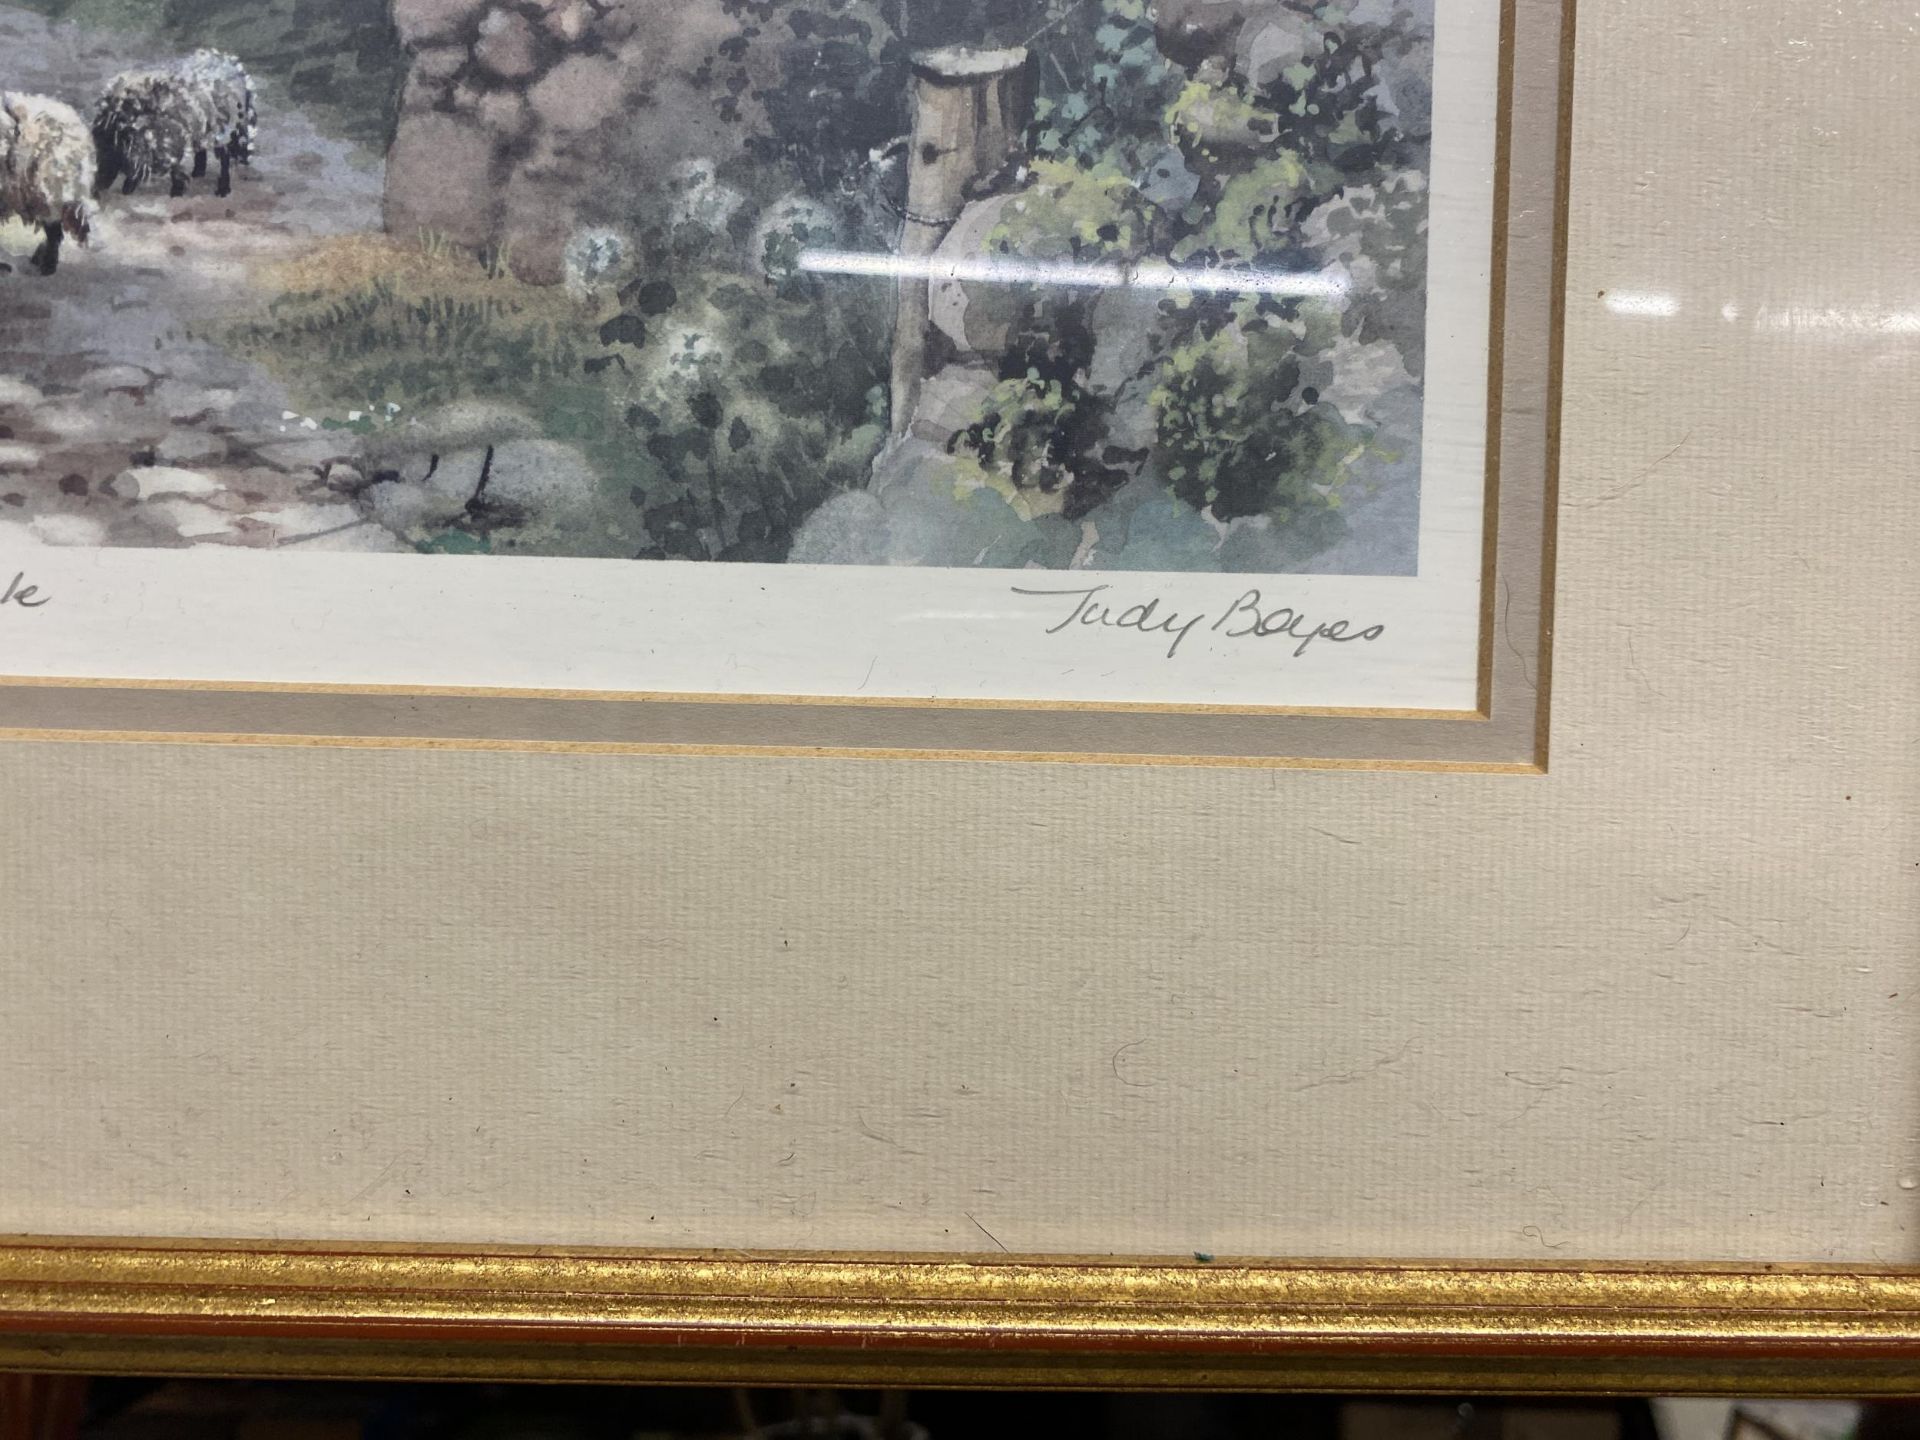 TWO LARGE GILT FRAMED JUDY BOYES PENCIL SIGNED PRINTS OF COUNTRYSIDE SCENES - Image 3 of 4